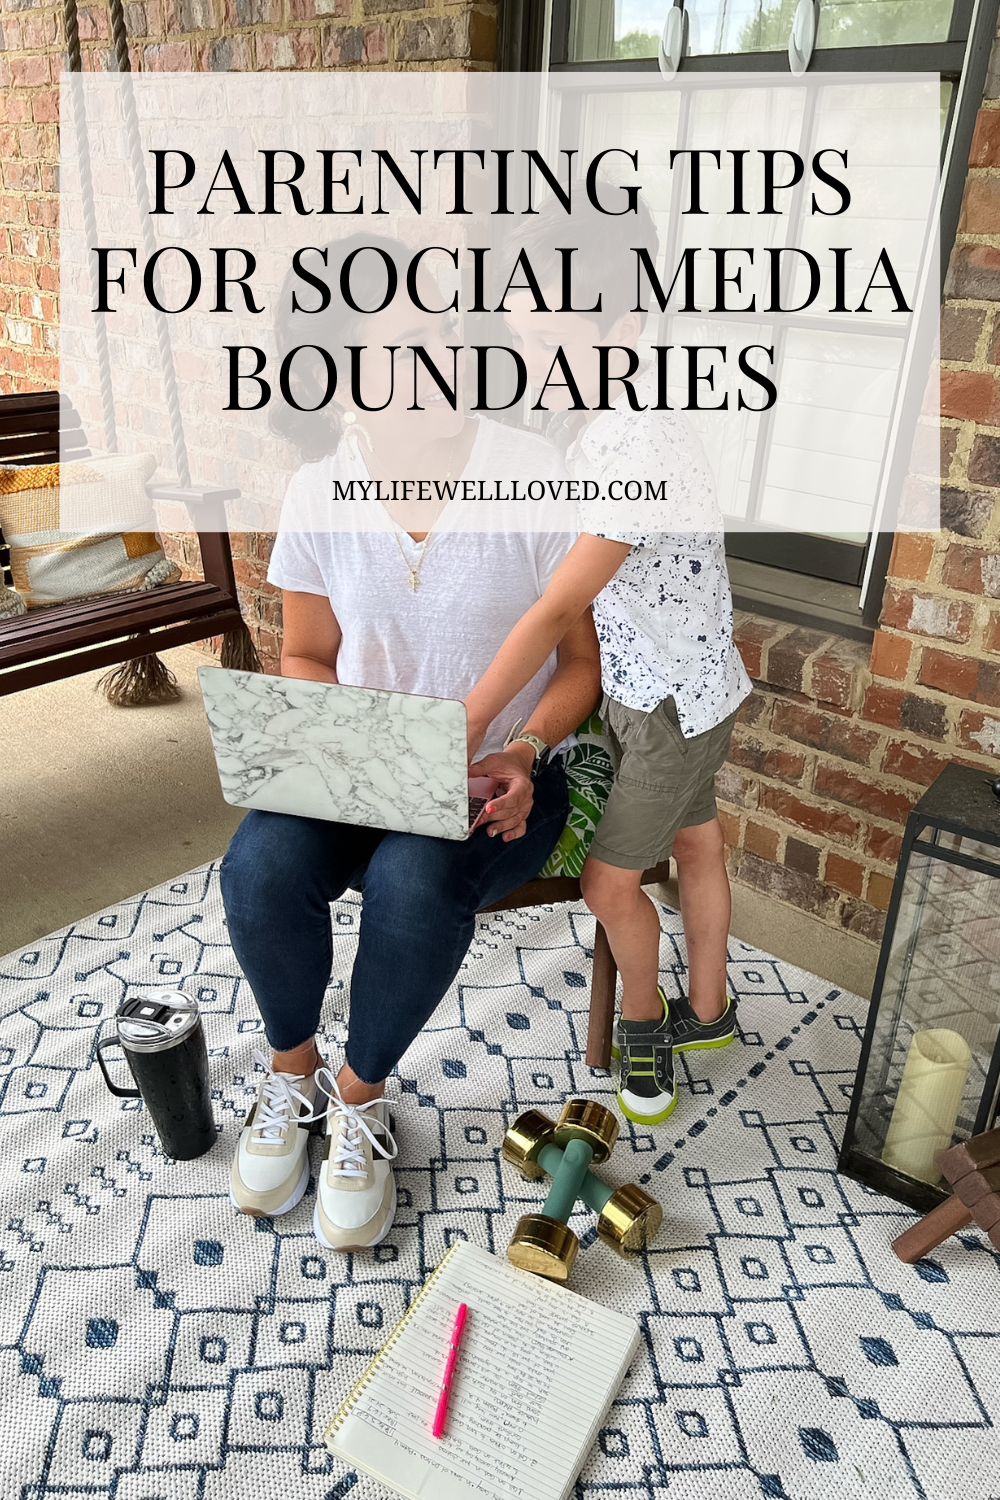 Christian Birmingham podcaster, boy mom, & health coach, Heather Brown, shares parenting tips for social media boundaries in today's digital world.